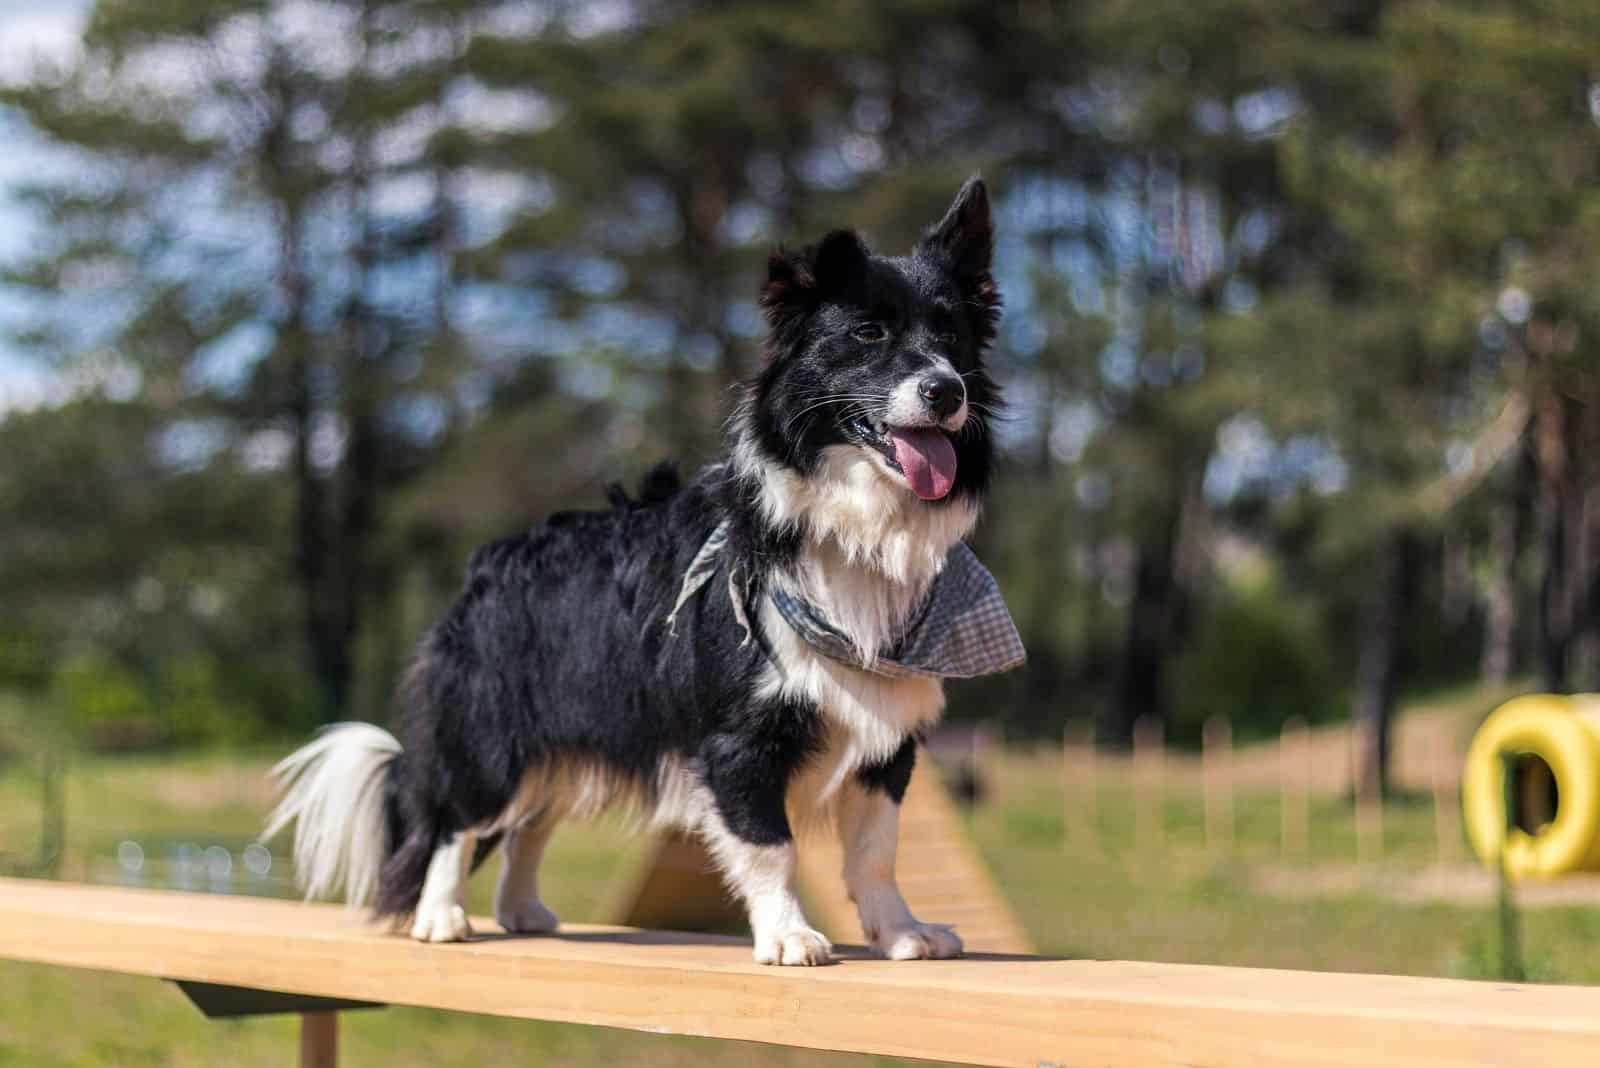 border collie and corgi mix dog standing in the bench outdoors